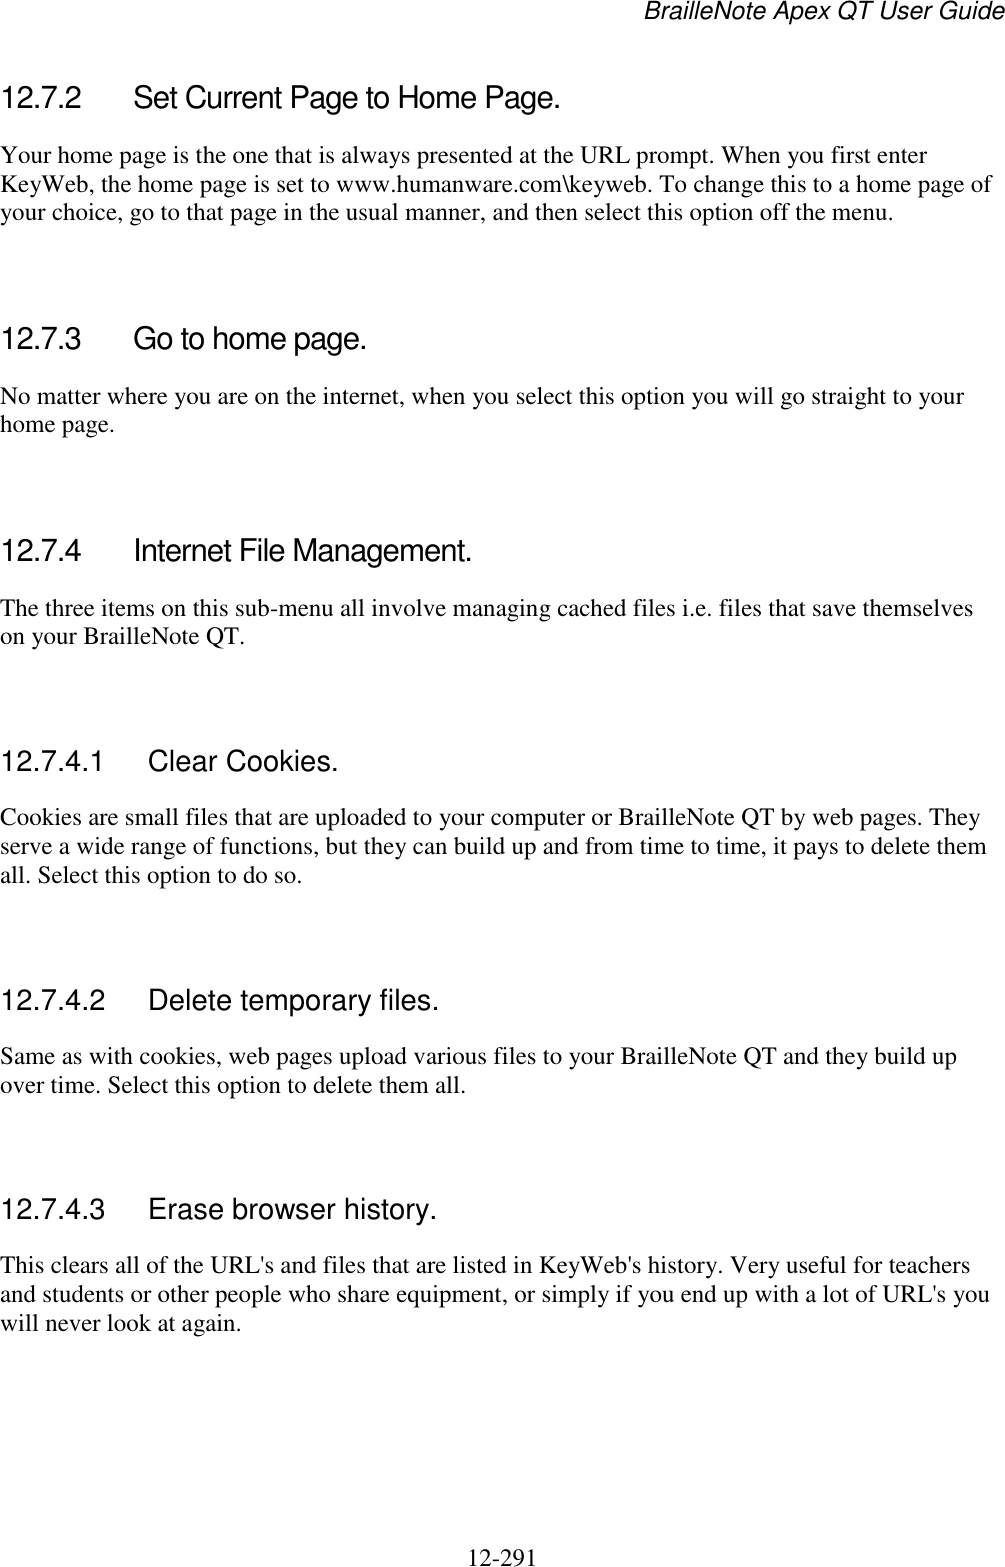 BrailleNote Apex QT User Guide  12-291   12.7.2  Set Current Page to Home Page. Your home page is the one that is always presented at the URL prompt. When you first enter KeyWeb, the home page is set to www.humanware.com\keyweb. To change this to a home page of your choice, go to that page in the usual manner, and then select this option off the menu.   12.7.3  Go to home page. No matter where you are on the internet, when you select this option you will go straight to your home page.   12.7.4  Internet File Management. The three items on this sub-menu all involve managing cached files i.e. files that save themselves on your BrailleNote QT.    12.7.4.1  Clear Cookies. Cookies are small files that are uploaded to your computer or BrailleNote QT by web pages. They serve a wide range of functions, but they can build up and from time to time, it pays to delete them all. Select this option to do so.   12.7.4.2  Delete temporary files. Same as with cookies, web pages upload various files to your BrailleNote QT and they build up over time. Select this option to delete them all.   12.7.4.3  Erase browser history. This clears all of the URL&apos;s and files that are listed in KeyWeb&apos;s history. Very useful for teachers and students or other people who share equipment, or simply if you end up with a lot of URL&apos;s you will never look at again.   